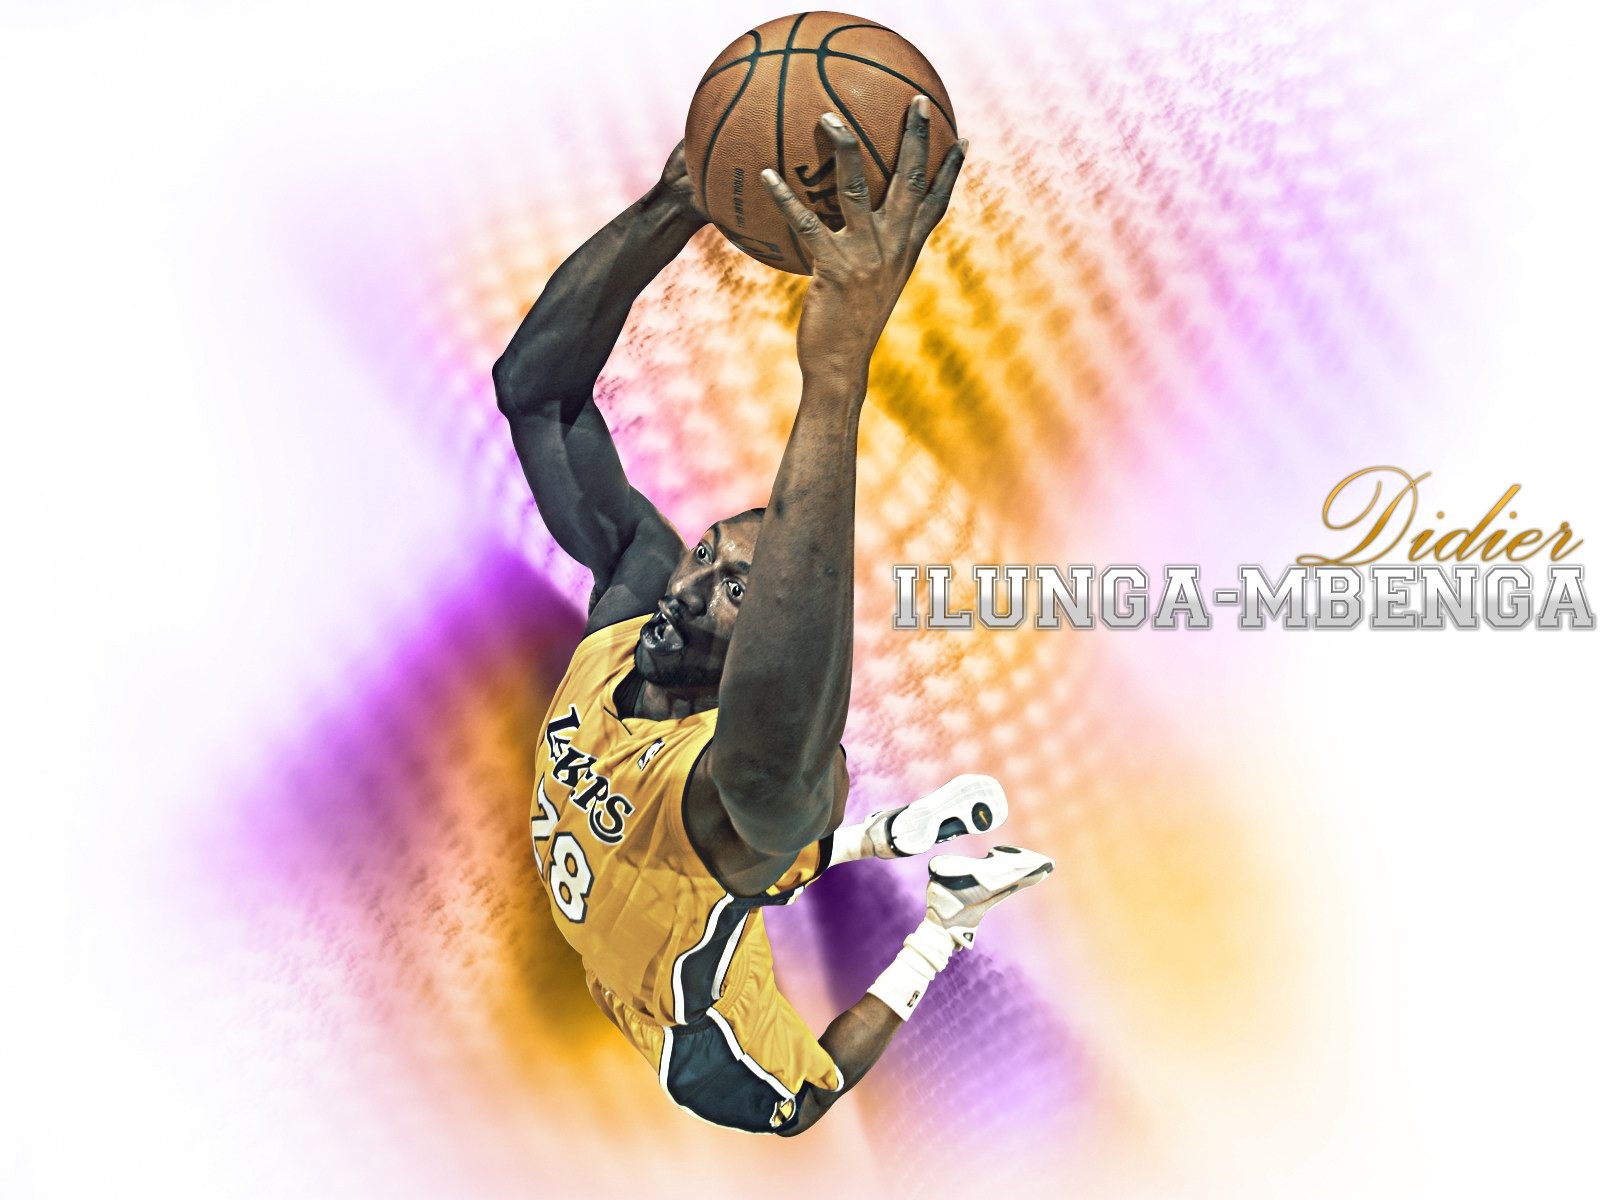 Los Angeles Lakers Wallpaper Oficial #9 - 1600x1200